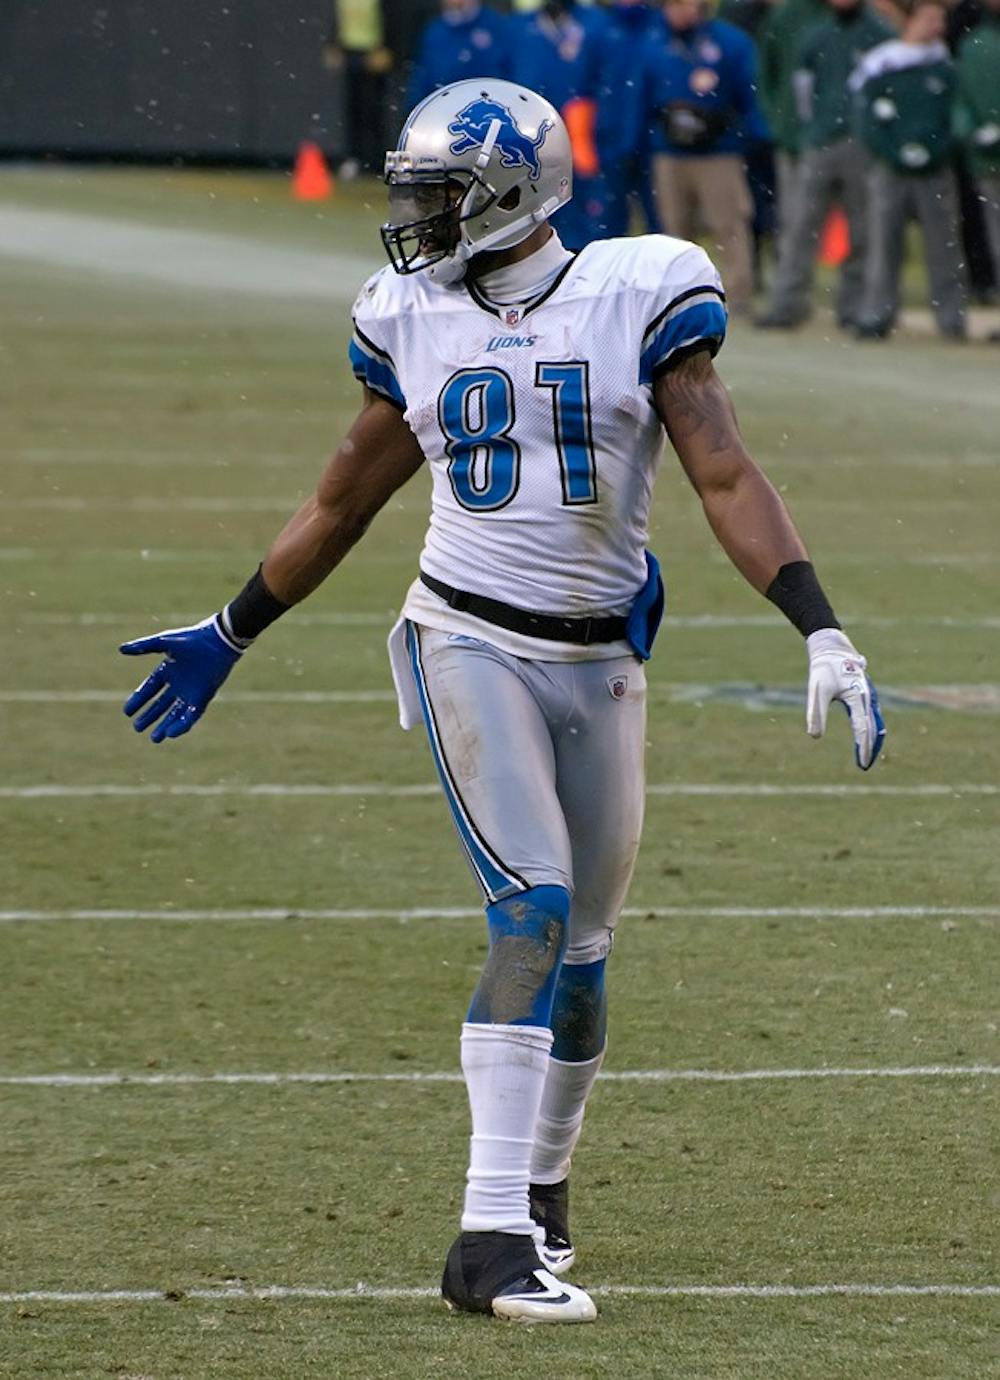 <p>Calvin Johnson takes the field for a play against the Green Bay Packers</p>
<h6>Photo Credit: Mike Morbeck via Wikimedia Commons&nbsp;</h6>